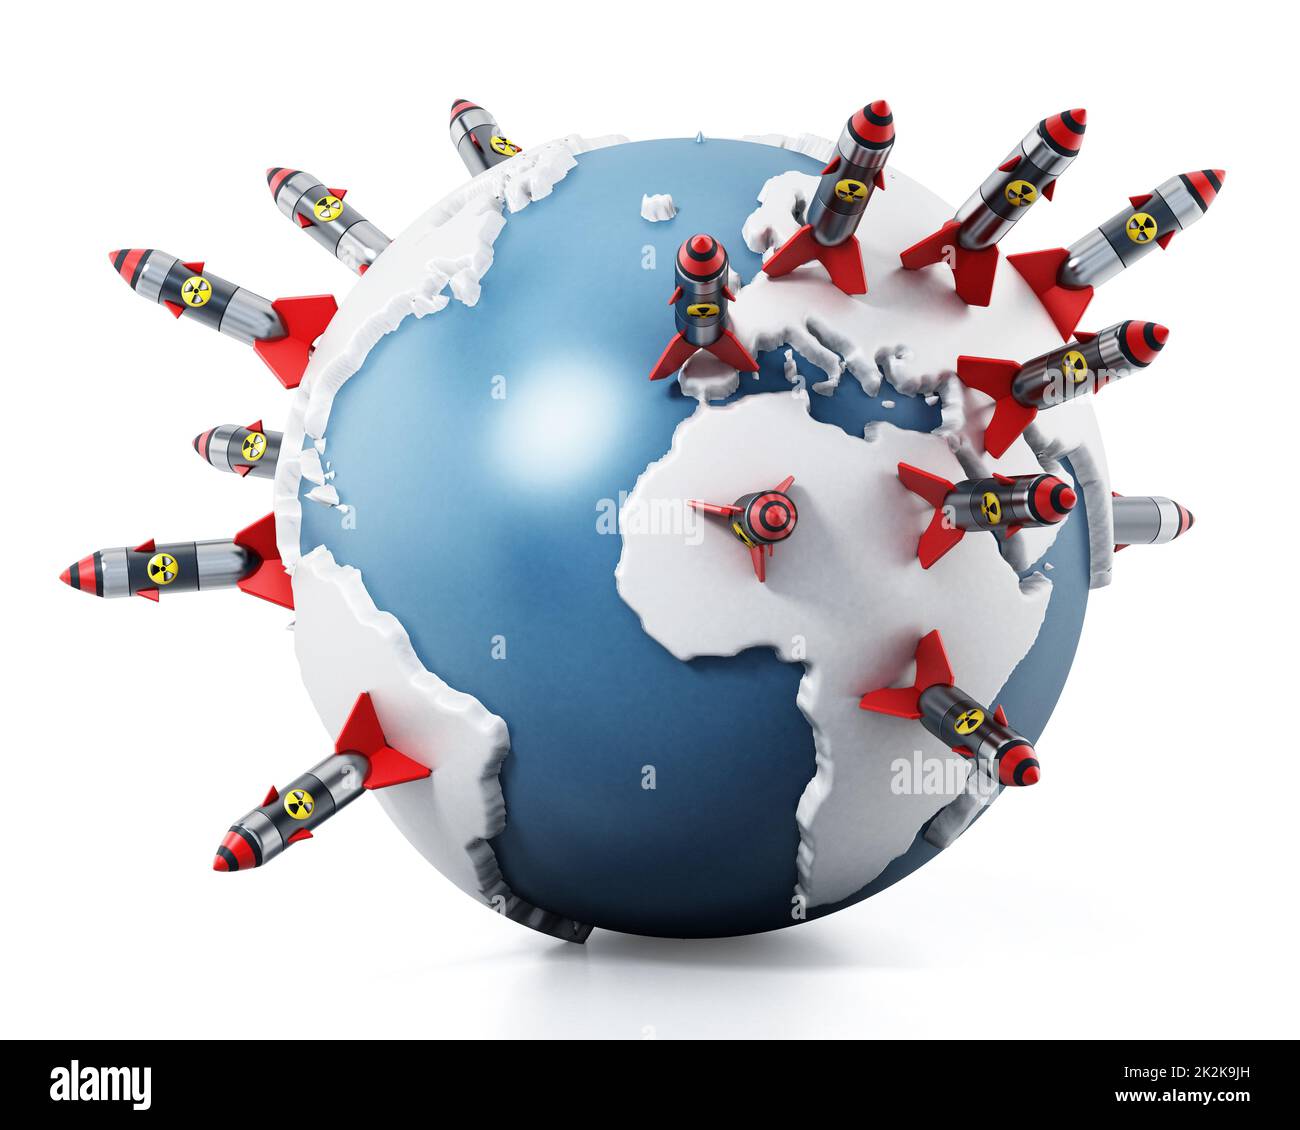 Nuclear missiles standing on world map. 3D illustration Stock Photo